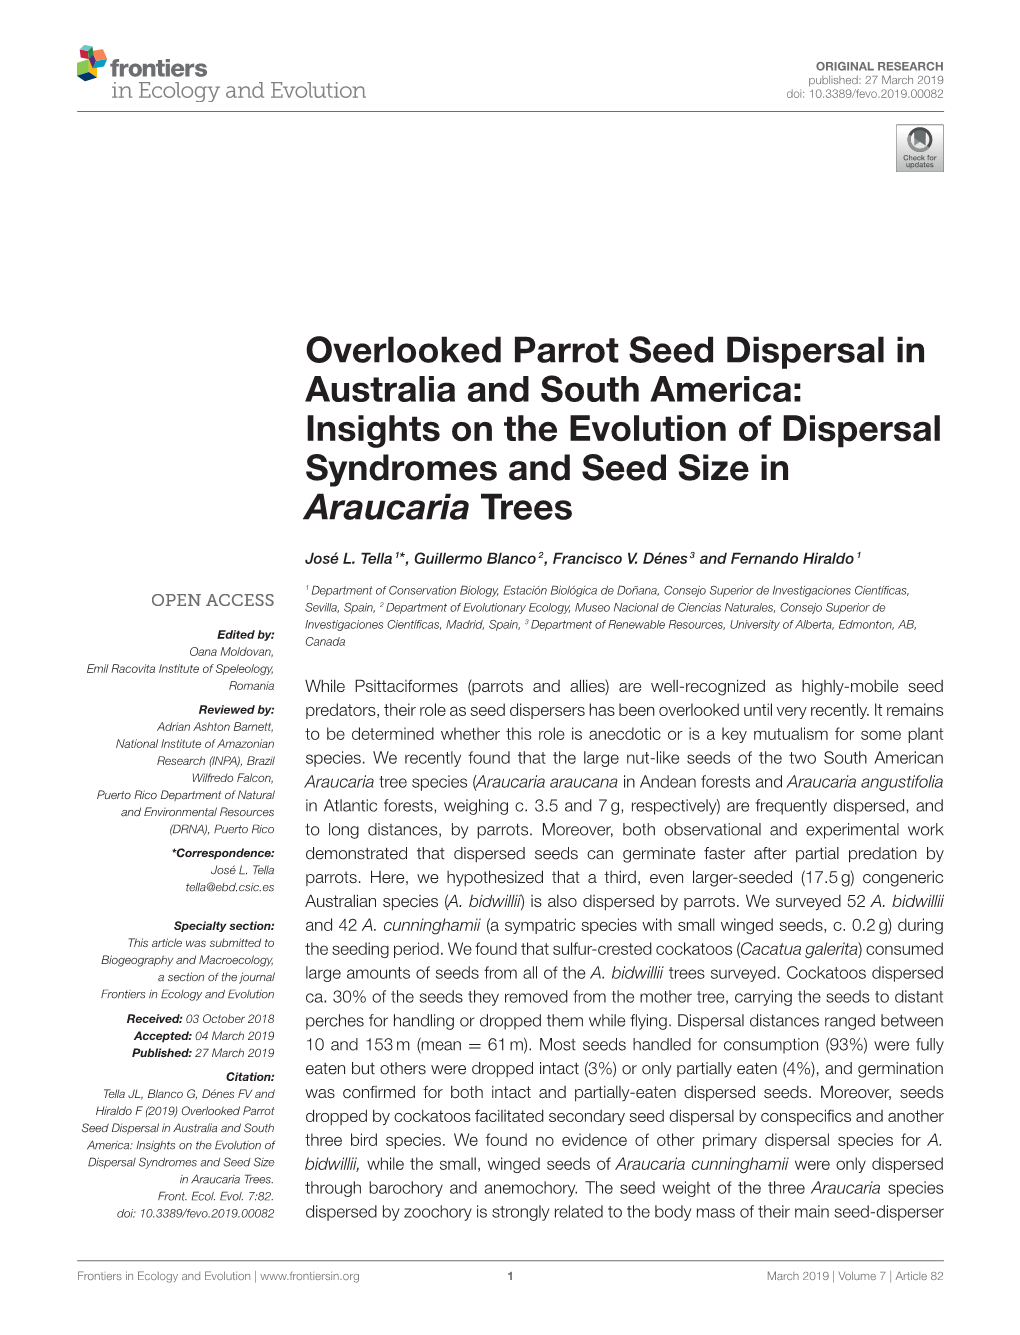 Overlooked Parrot Seed Dispersal in Australia and South America: Insights on the Evolution of Dispersal Syndromes and Seed Size in Araucaria Trees